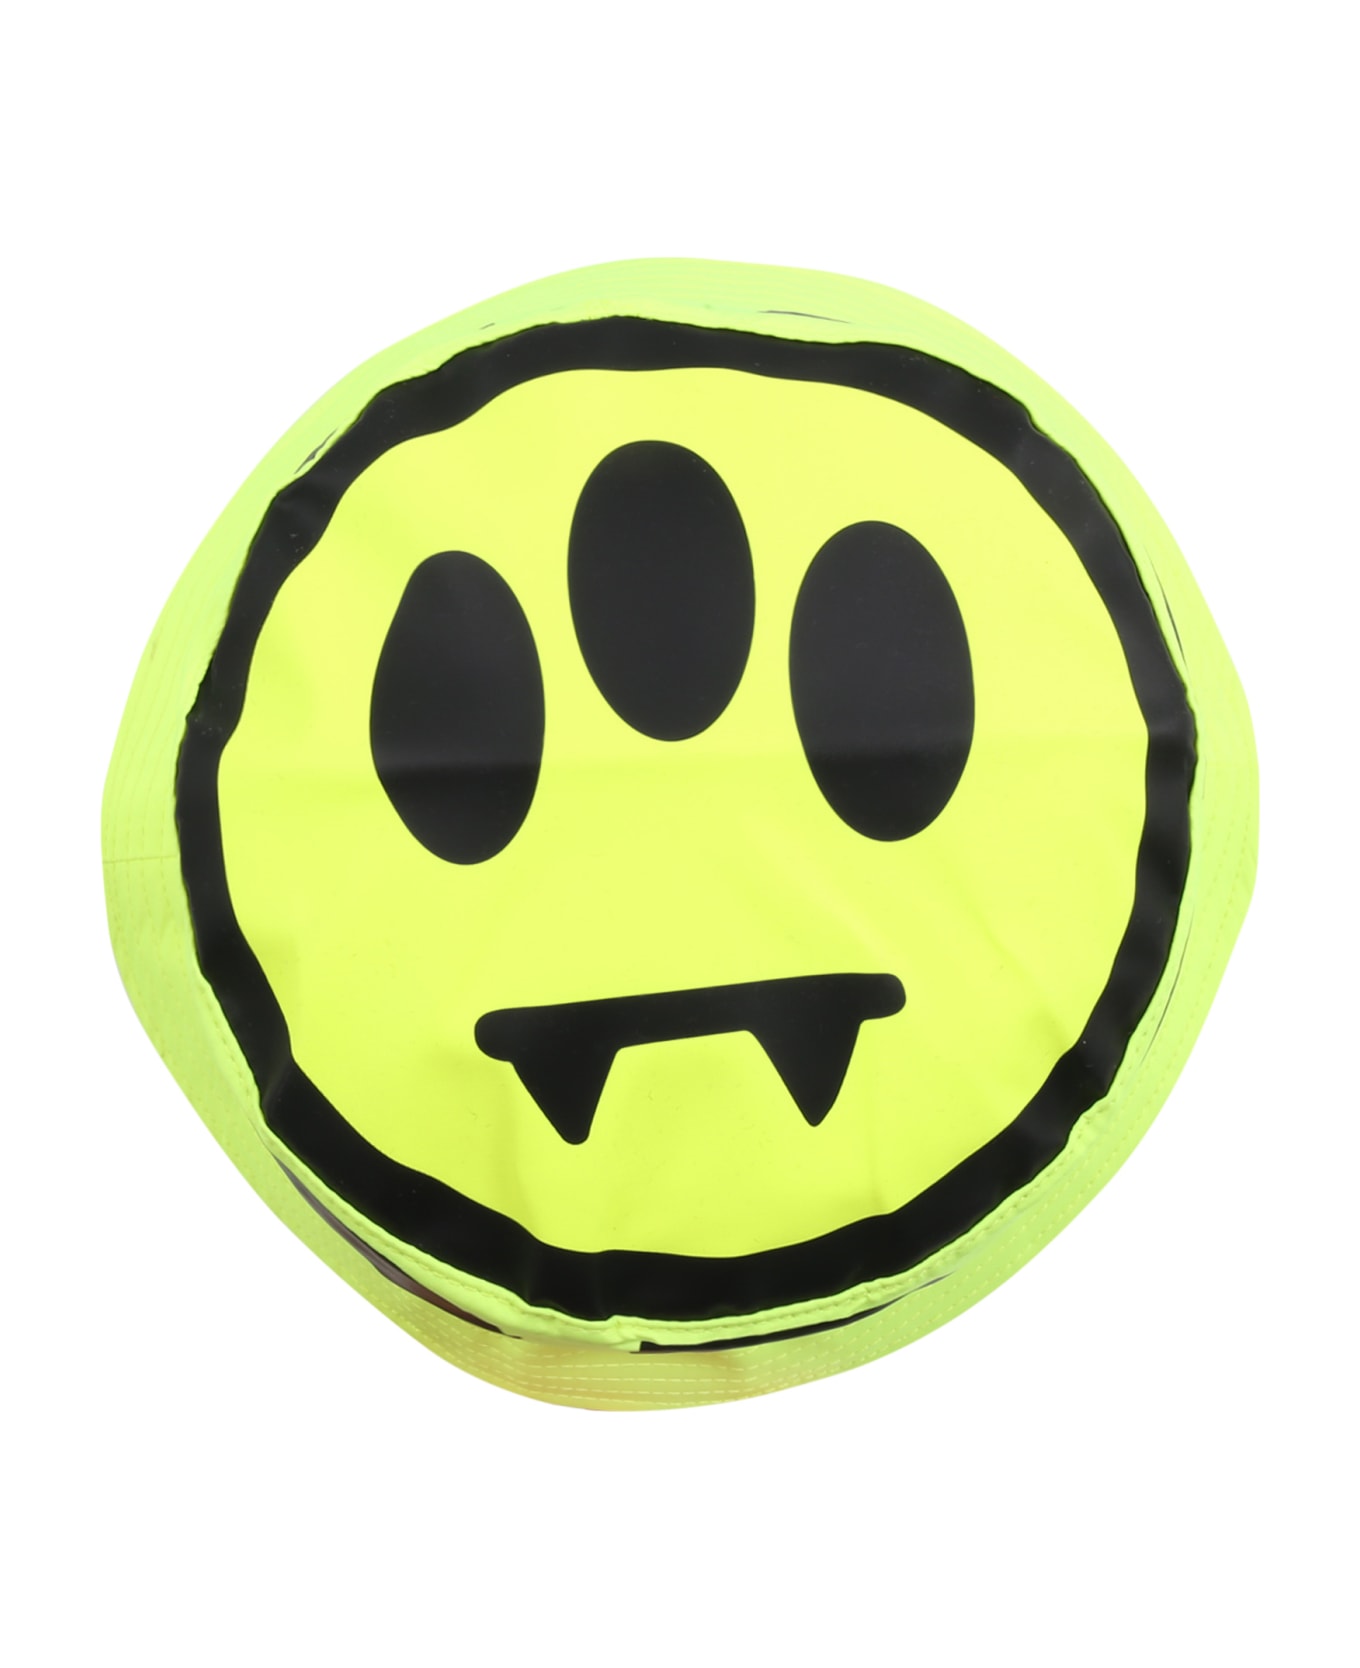 Barrow Neon Yellow Cloche For Kids With Logo - YELLOW アクセサリー＆ギフト